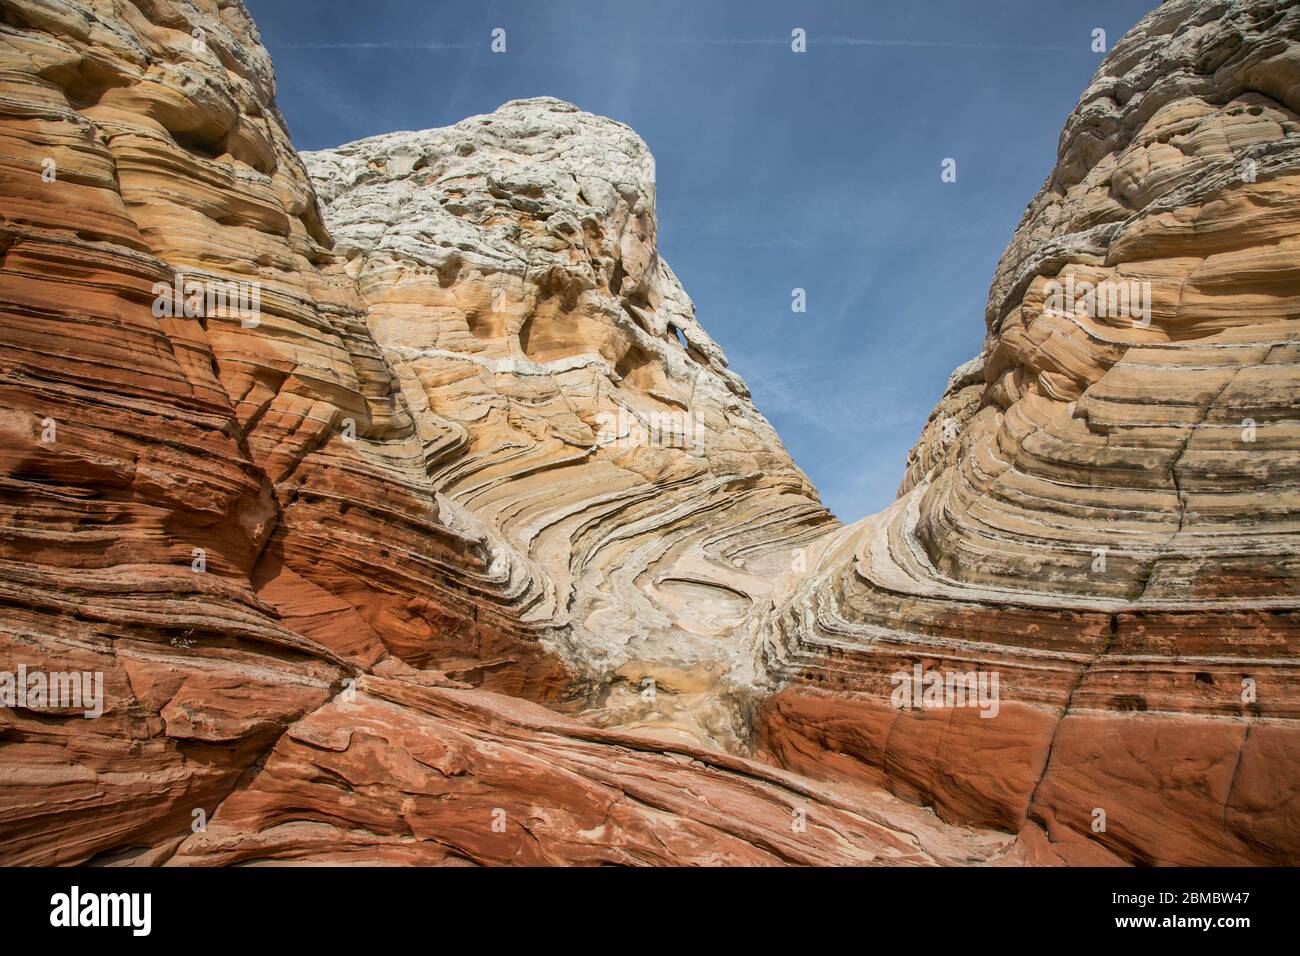 A wave-like sandstone formation in White Pocket, Vermilion Cliffs Stock Photo